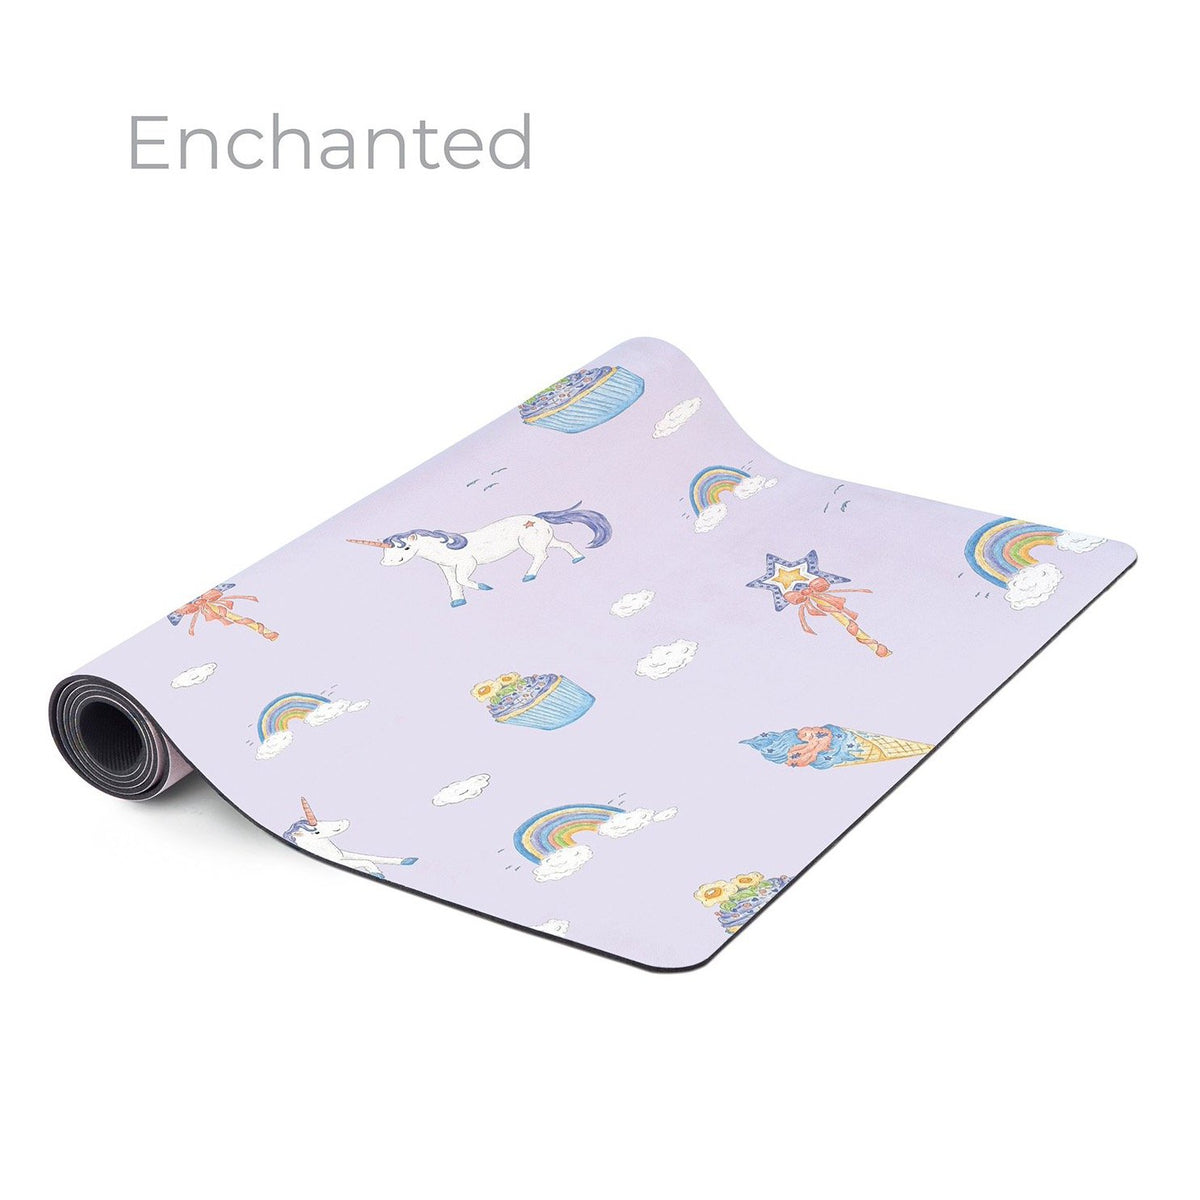 Kids Yoga Mat Set with Fun Prints, 12 Colorful Yoga Cards, and Carrier Bag  - Non-Toxic, Odor Free, 60 X 24 X 0.2 Inch